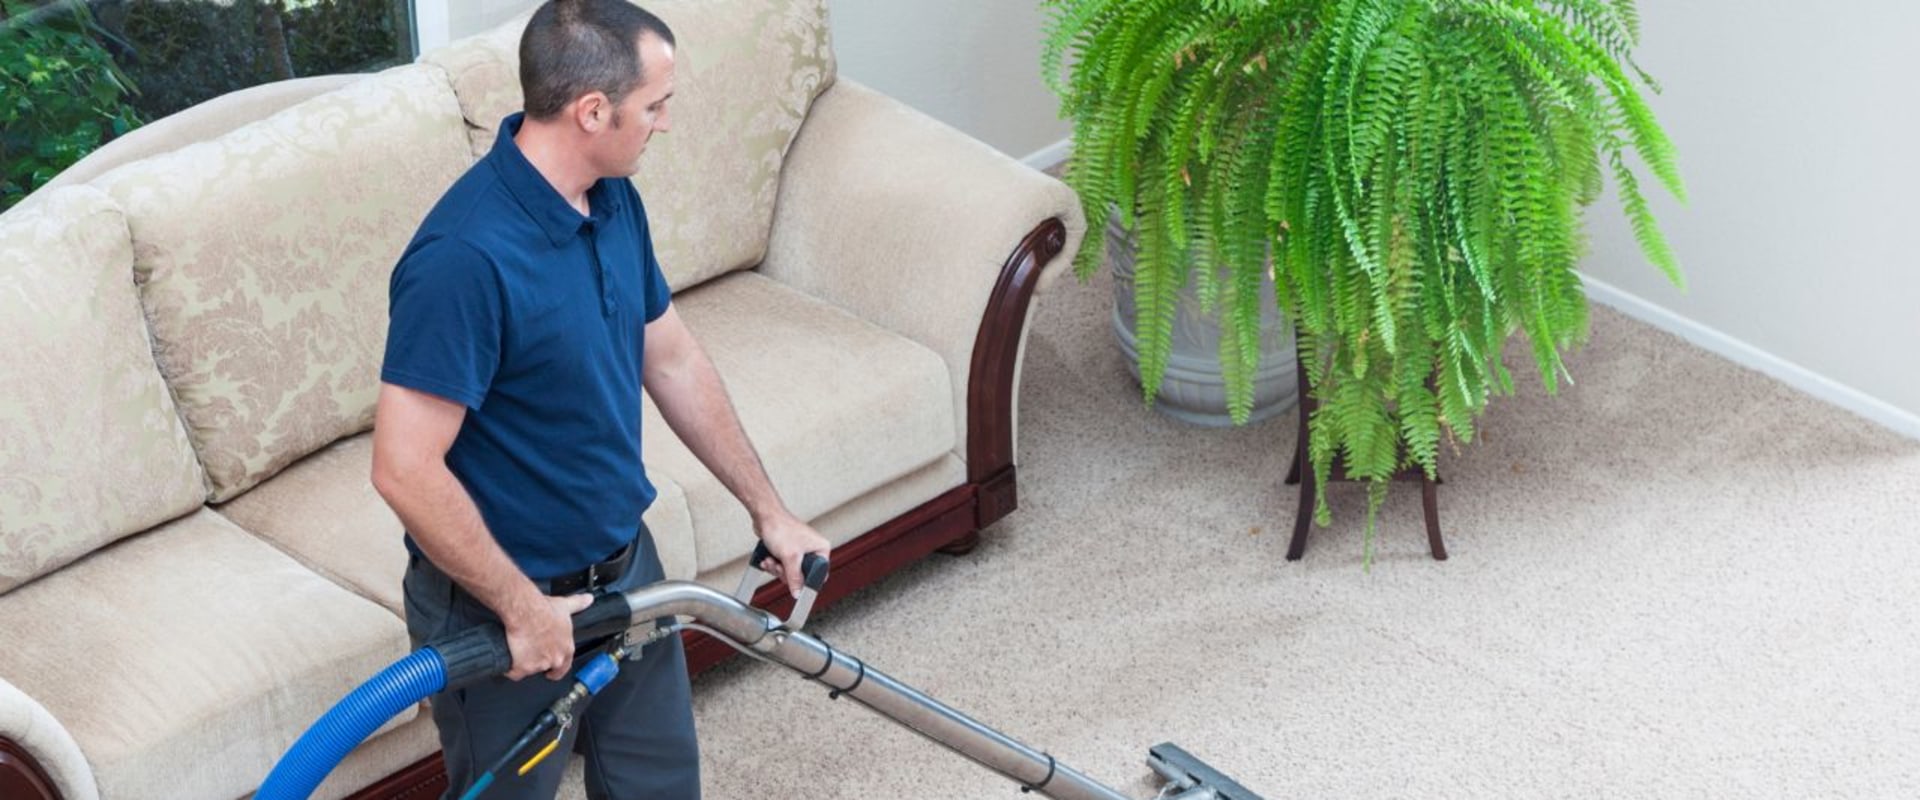 Maintain A Healthy And Welcoming Environment With Commercial Carpet Cleaning In Glencoe